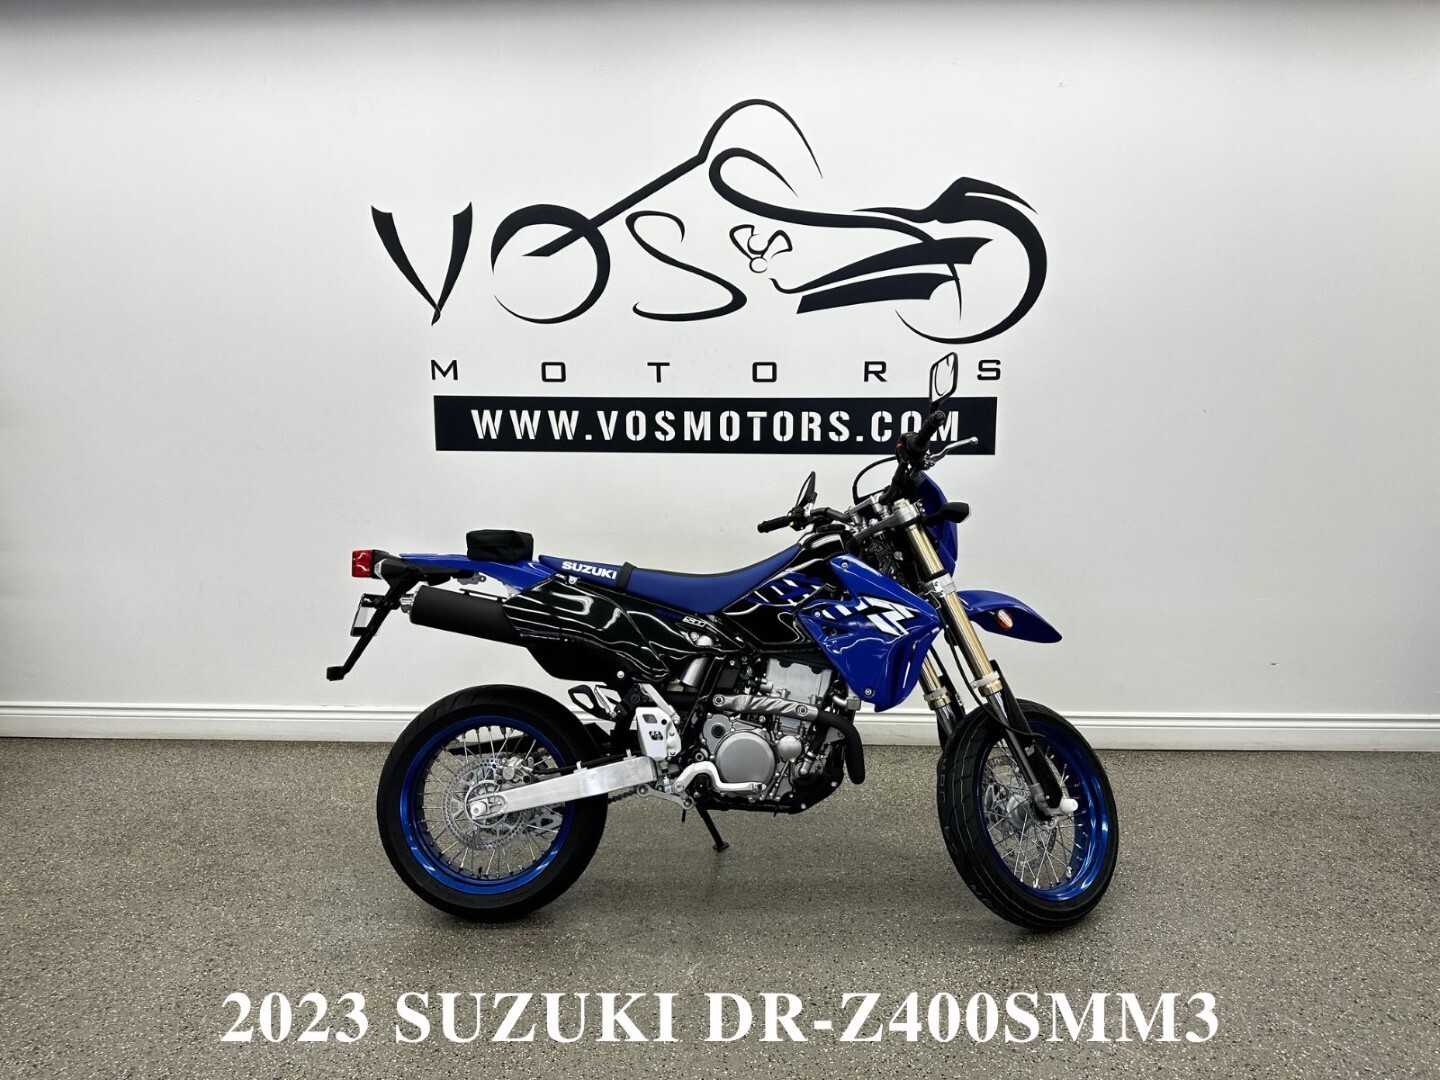 2023 Suzuki DR-Z400SMM3 DR-Z400 Supermoto - V5598 - -No Payments for 1 Yea